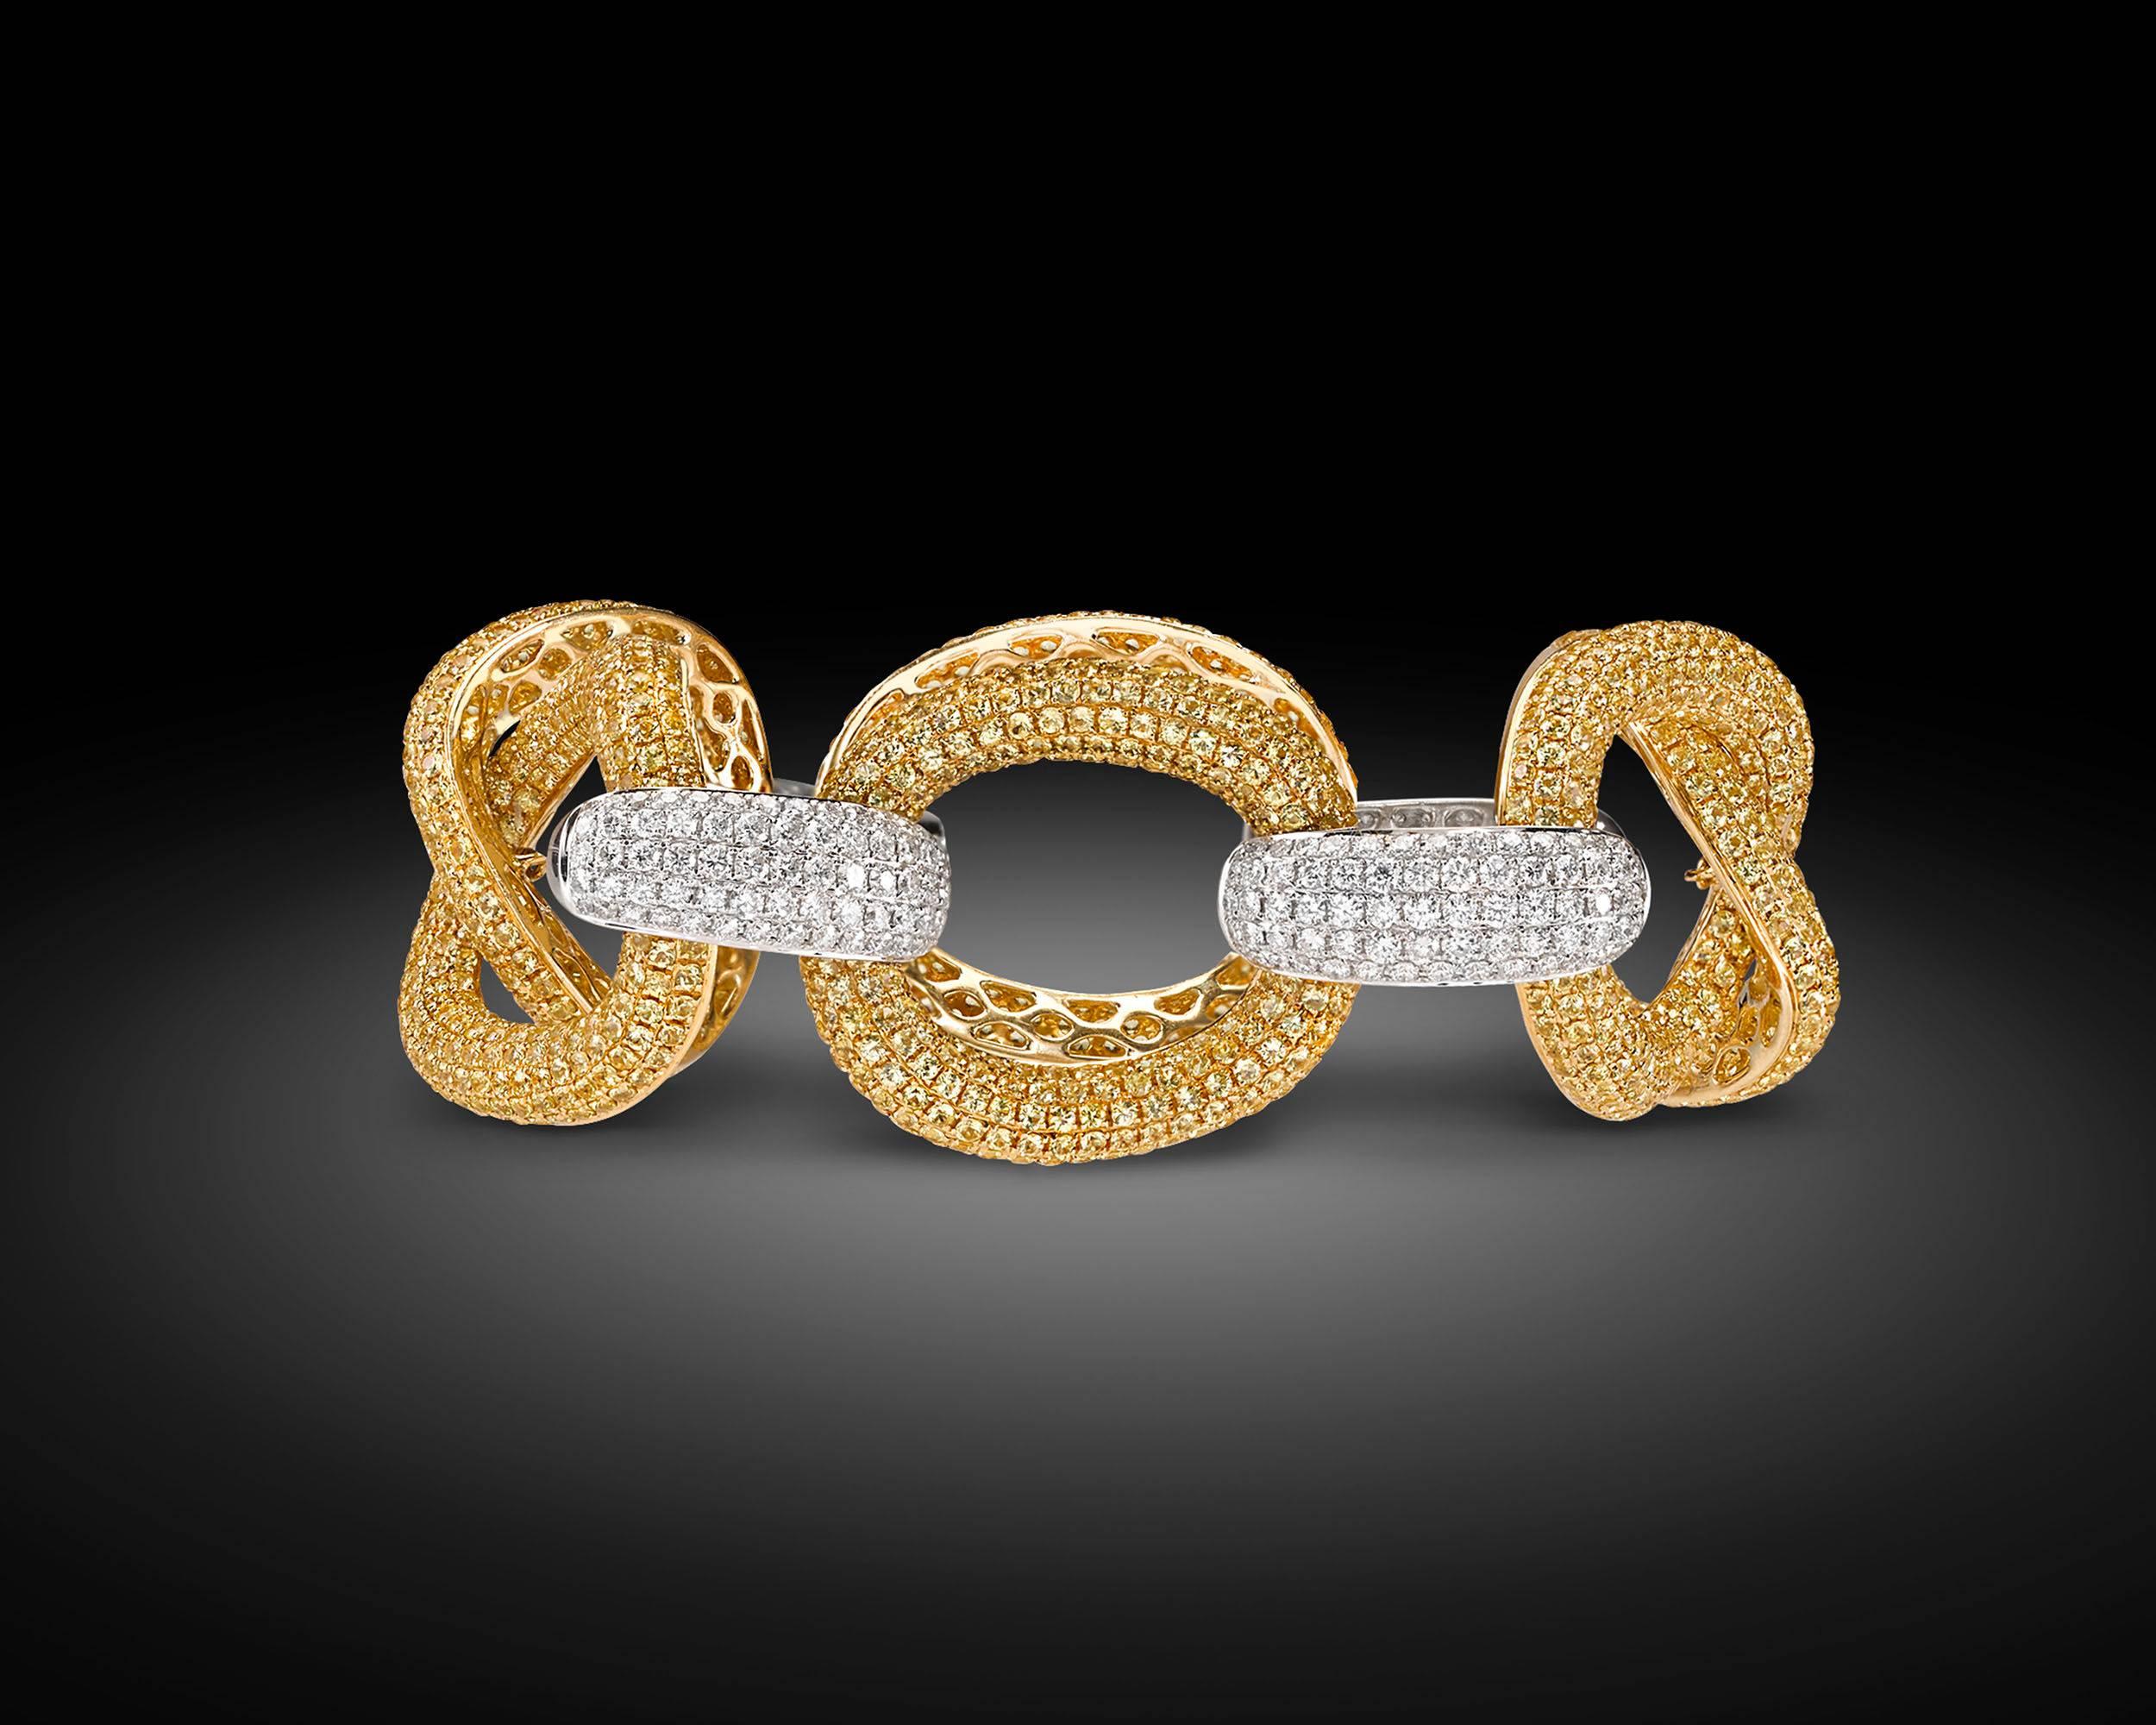 Links adorned by golden yellow sapphires totaling 24.69 carats intertwine with 4.58 total carats of shimmering diamonds in this chic large link bracelet. The enchanting jewels blanket alternating links, creating a dynamic contrast between the